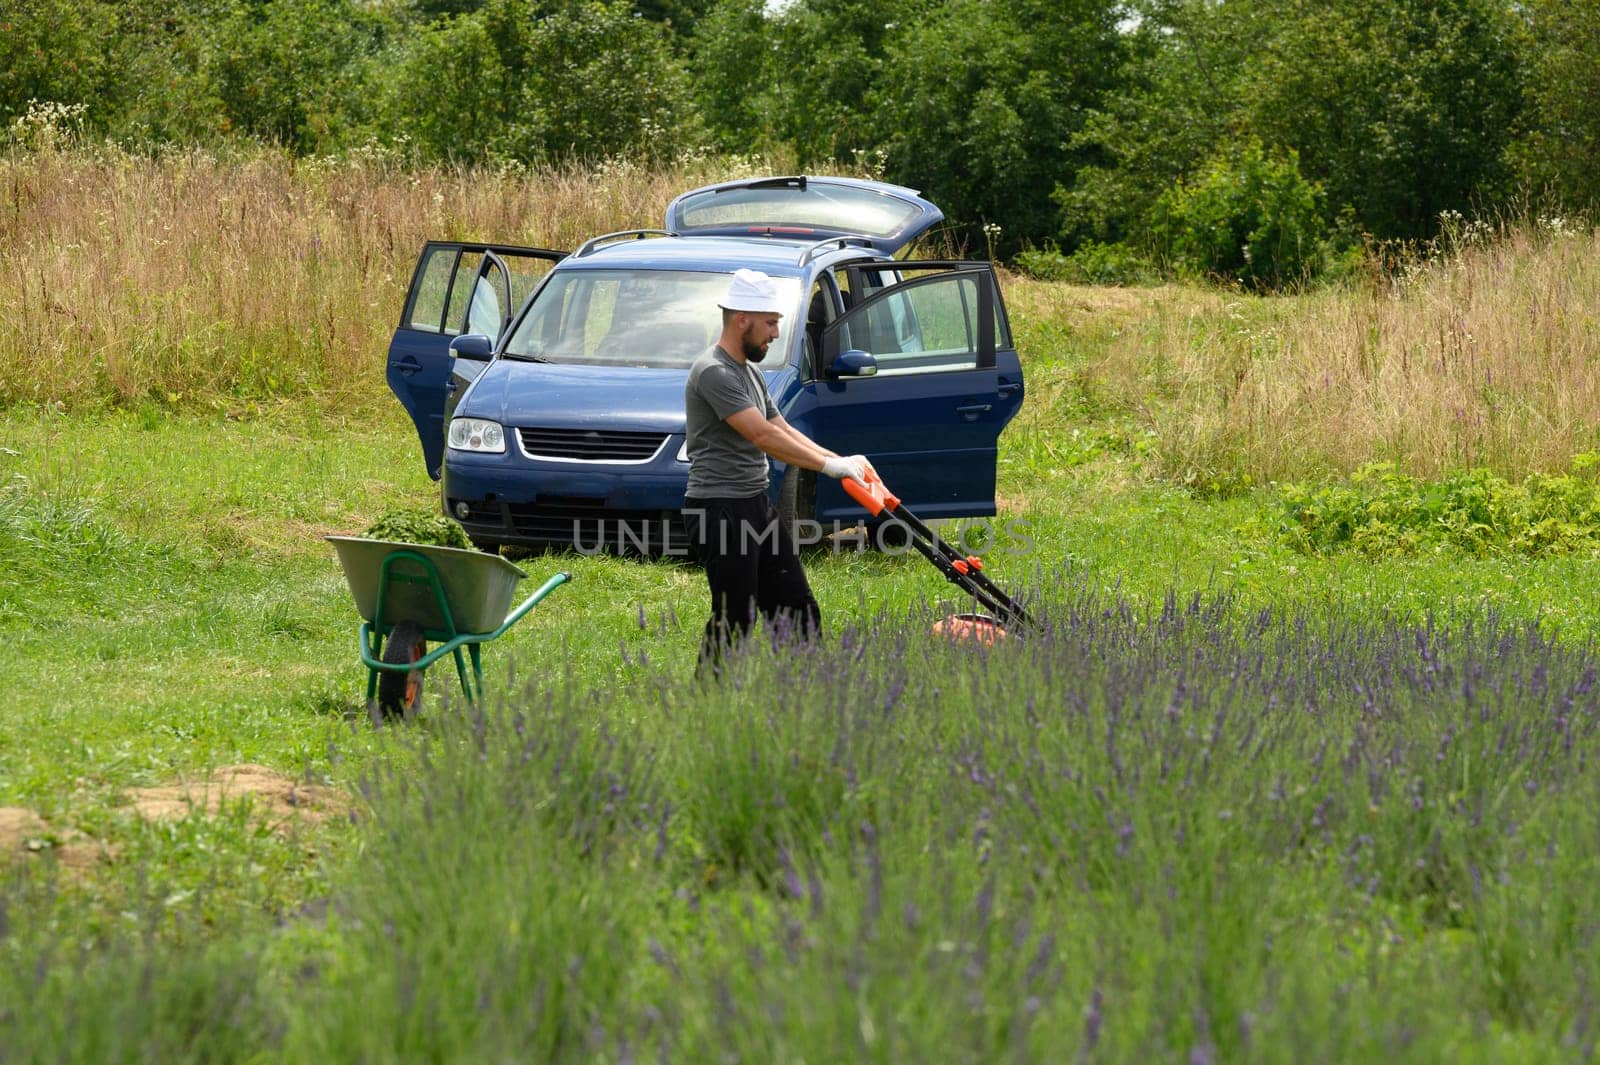 Care of a lavender field, a man mows the grass with an electric lawnmower, a young lavender field.